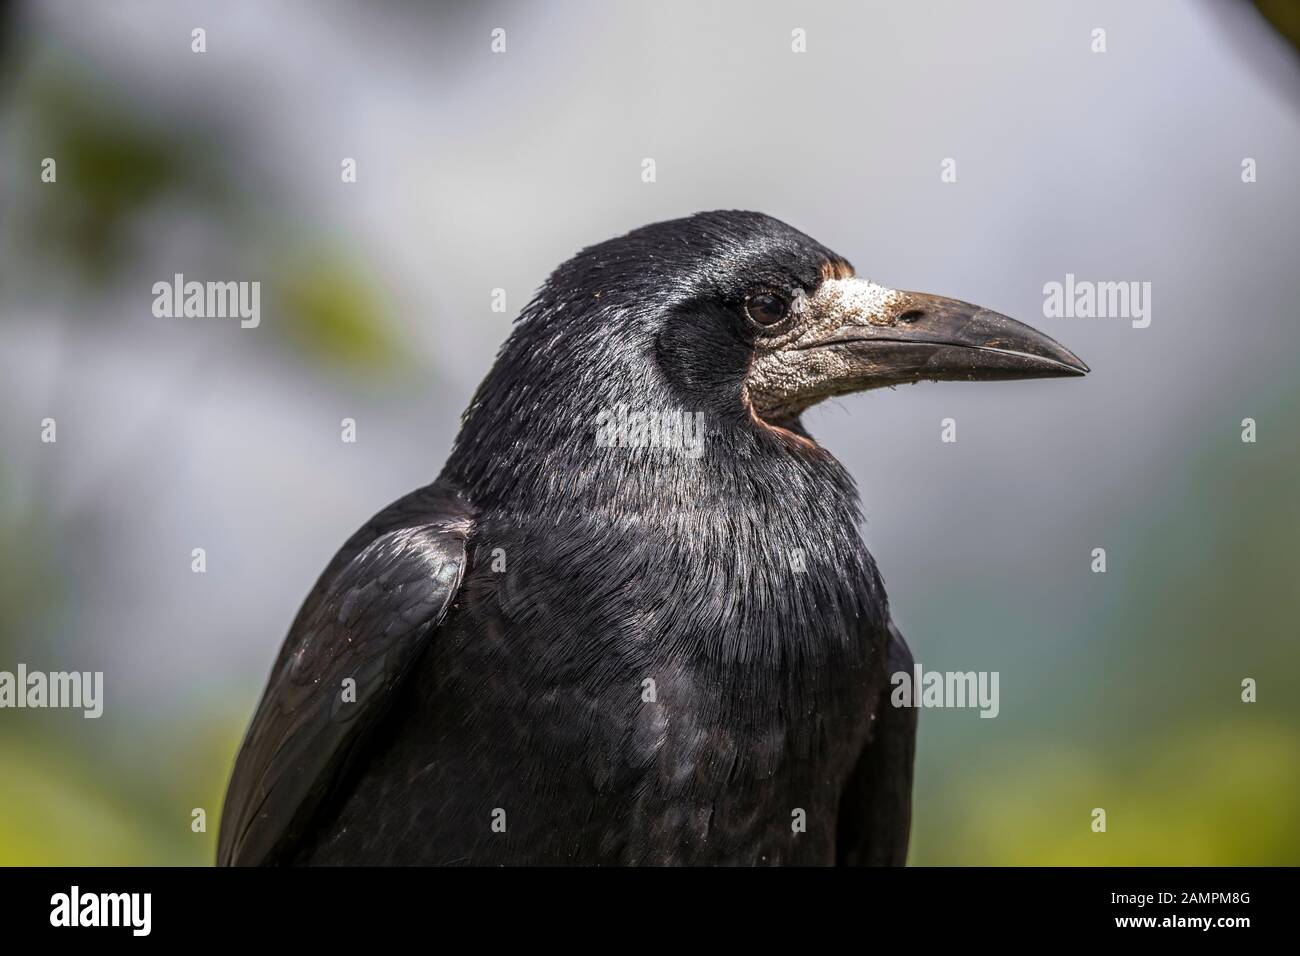 Side view close up of wild UK rook bird (Corvus frugilegus) isolated outdoors in natural habitat. Rook head with big beak facing right. Crows UK. Stock Photo